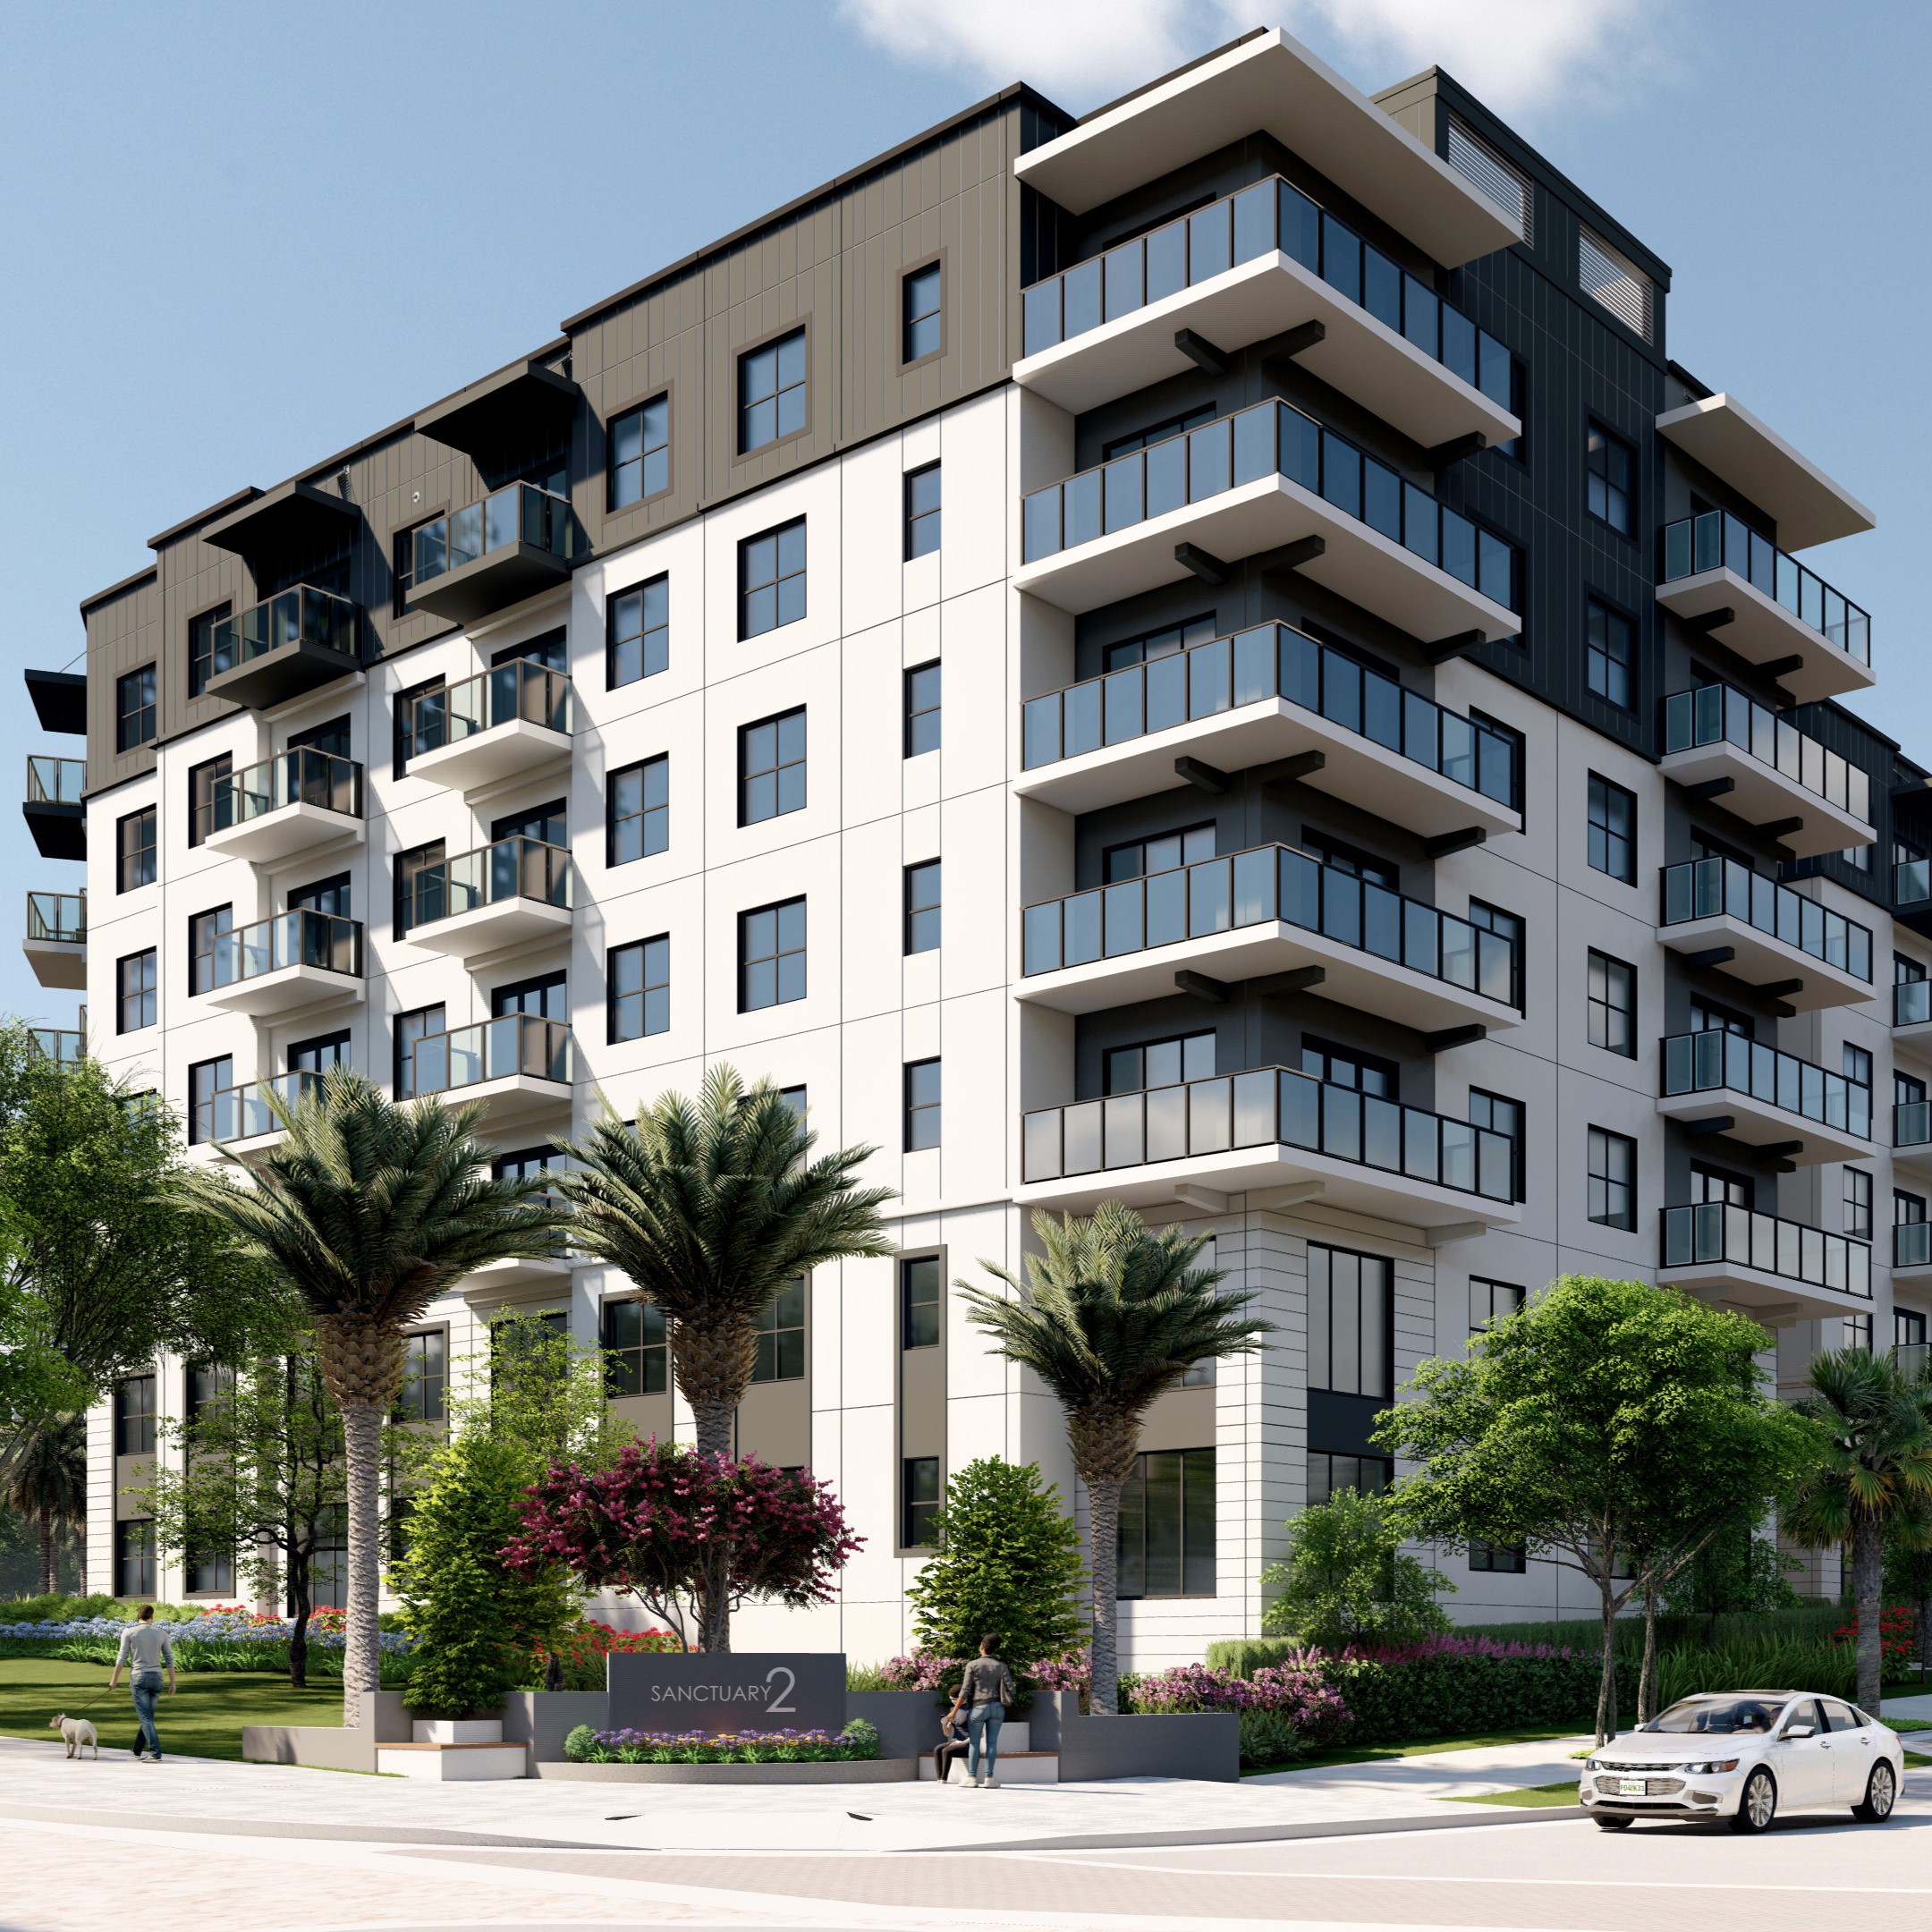 Luxury CenterPointe Apartments Coming to Altamonte Springs